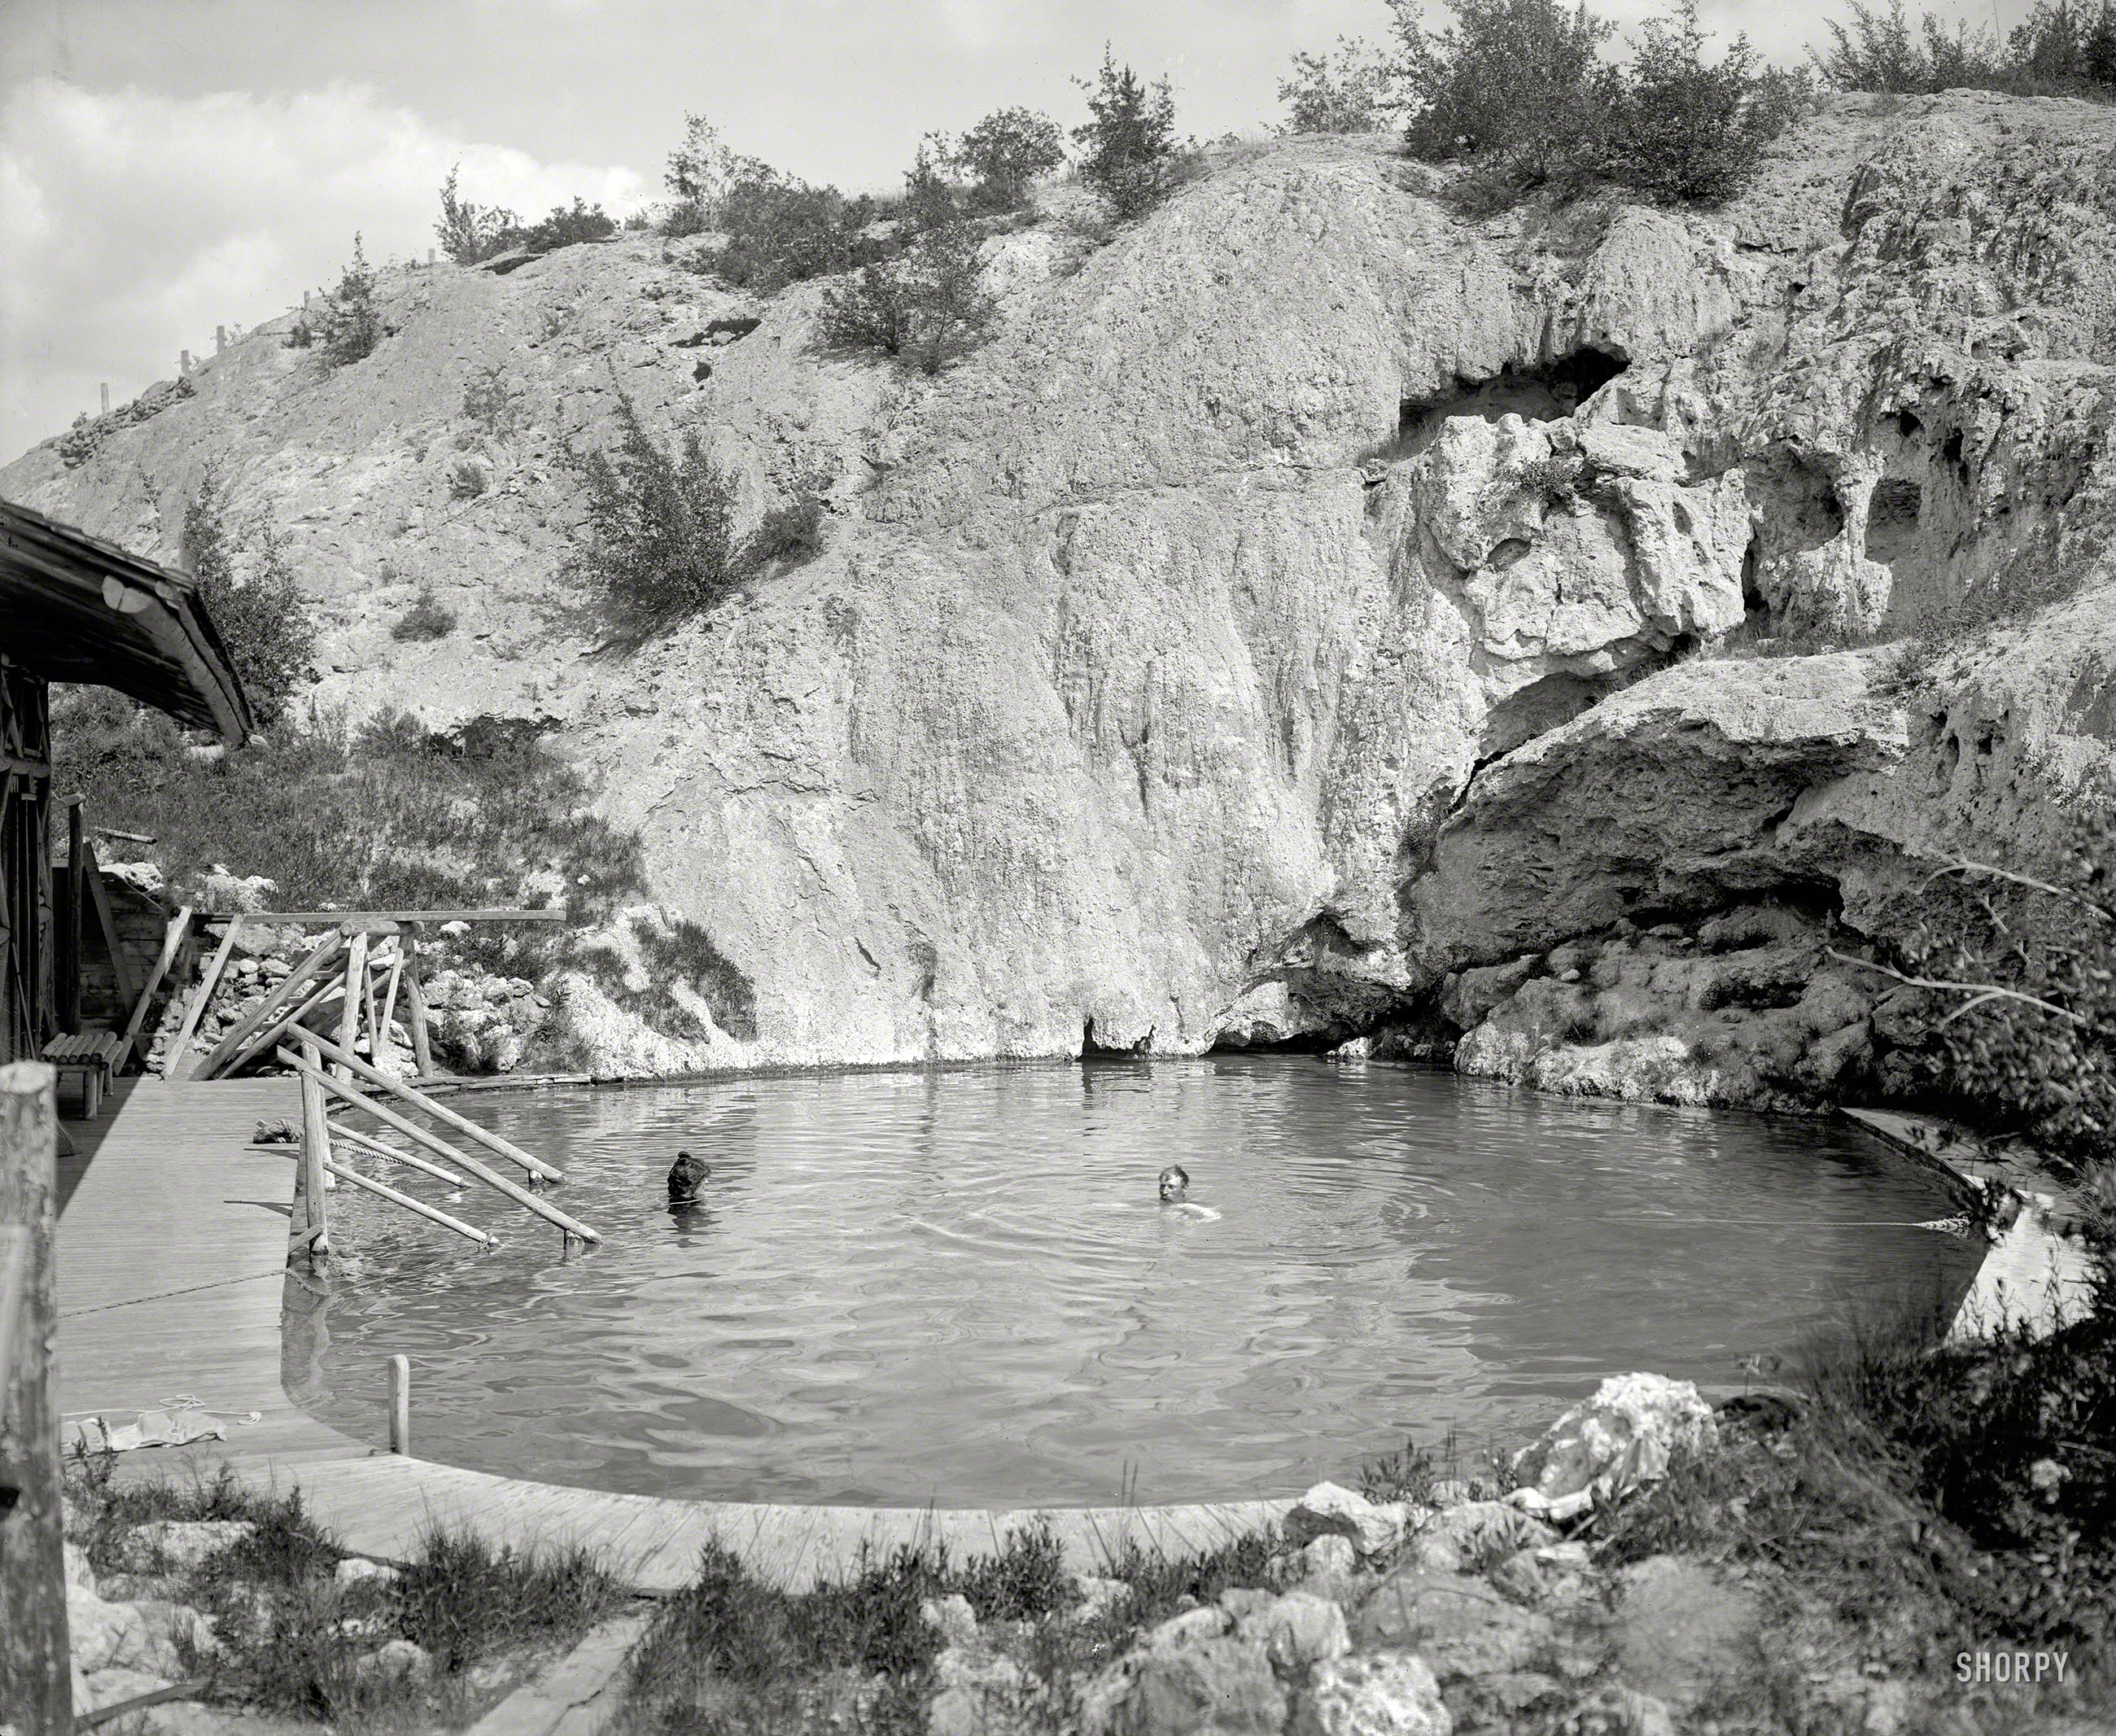 1902. "The Basin, lower spring, Banff, Alberta." A Banff spring, without the hotel usually appended to that phrase. 8x10 inch glass negative. View full size.